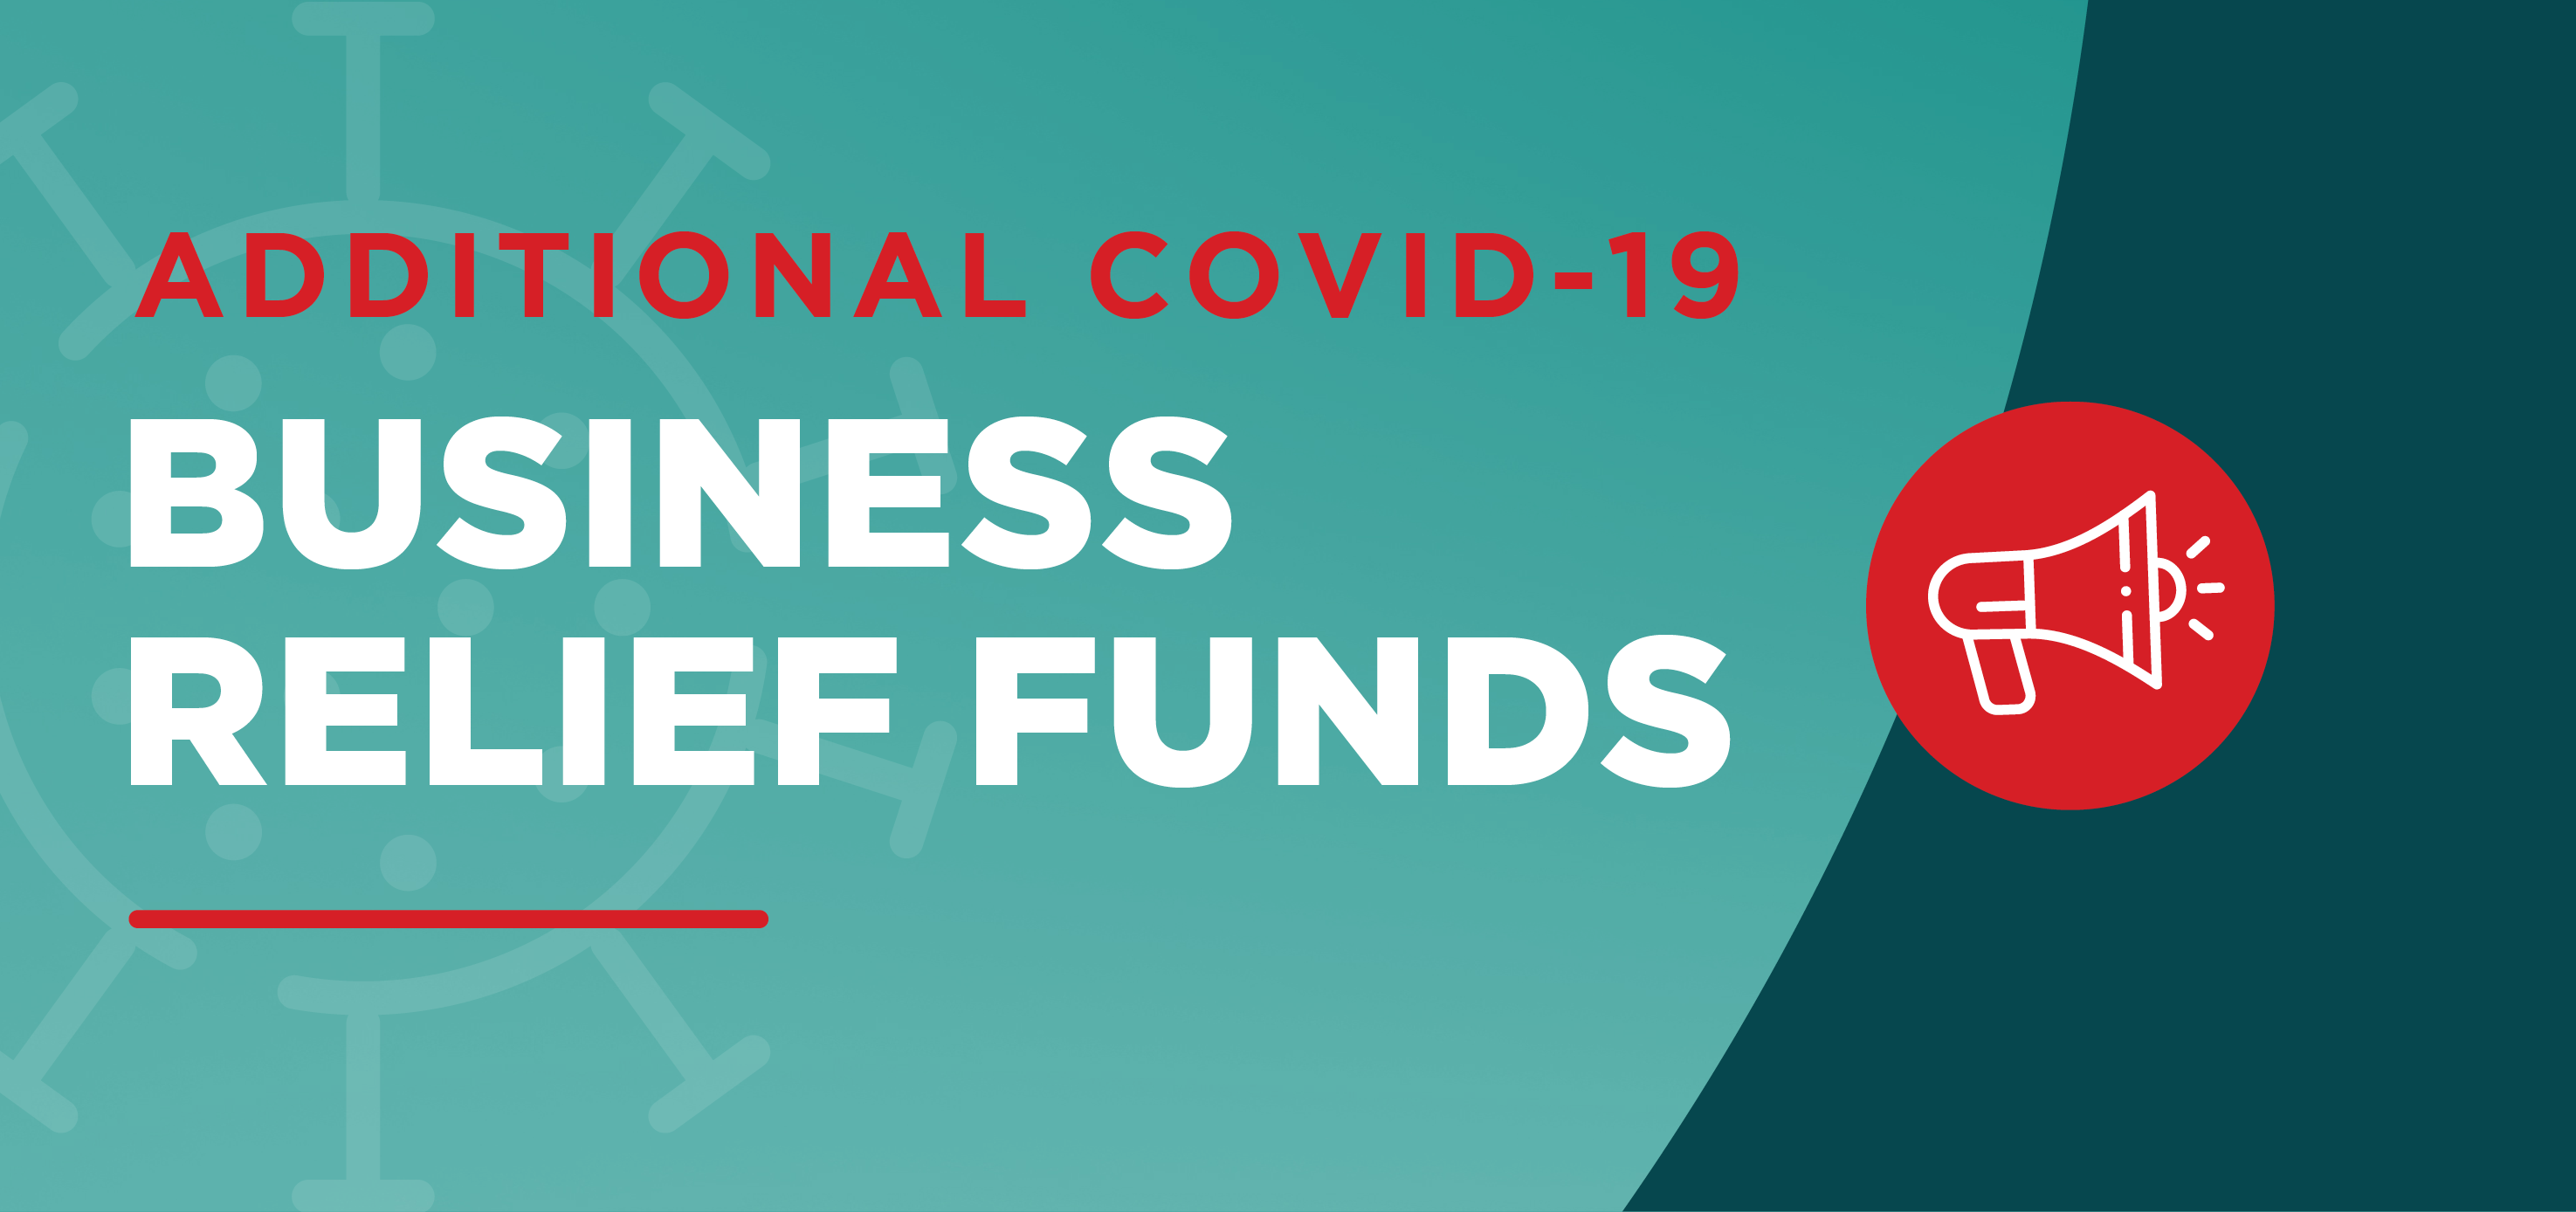 COVID_Additional_Small_Business_Relief_Funding_Secondary_Blog_708x333.png